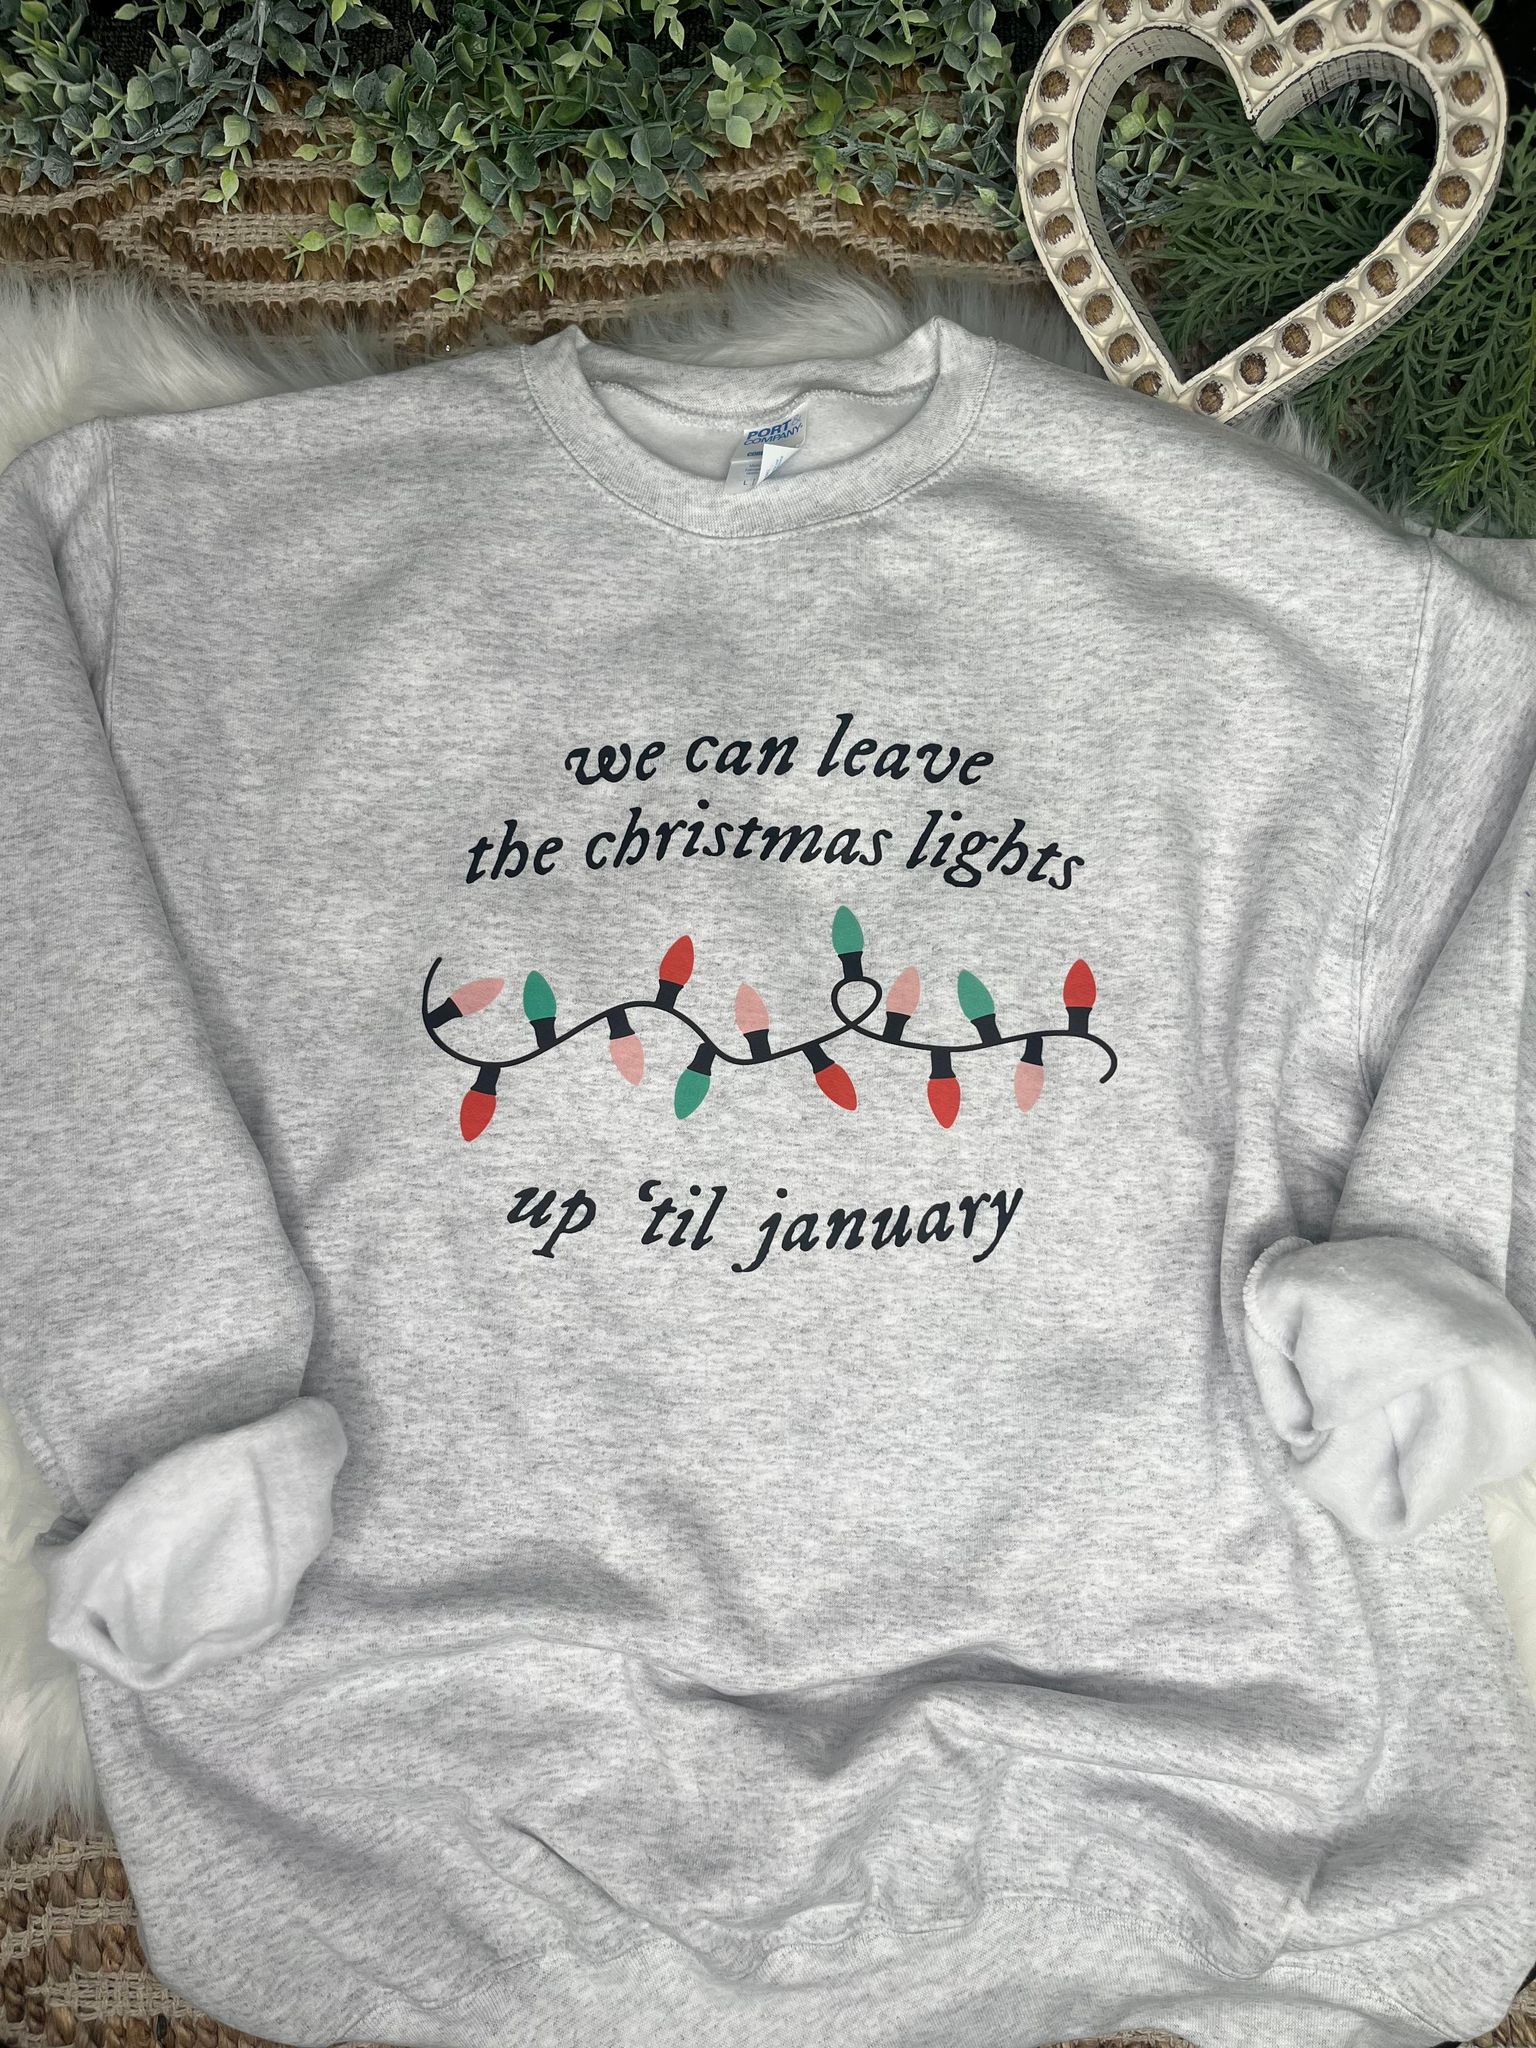 Sweatshirt LLC – Leave Up Lights Christmas We Can ASK Apparel The